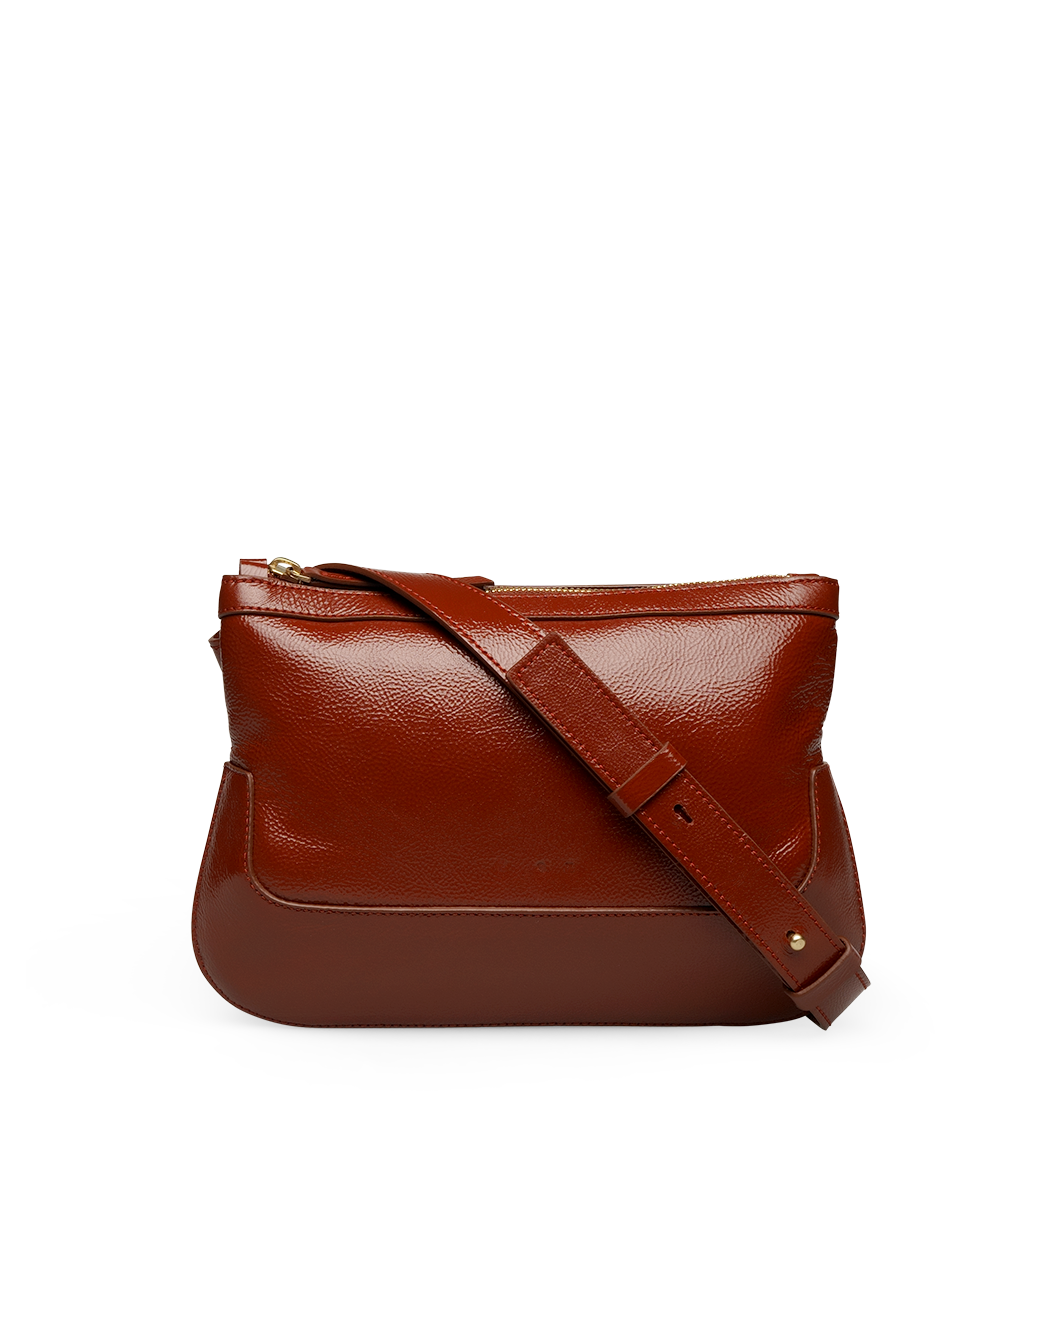 Modern, consciously crafted handbags using only luxury surplus leather